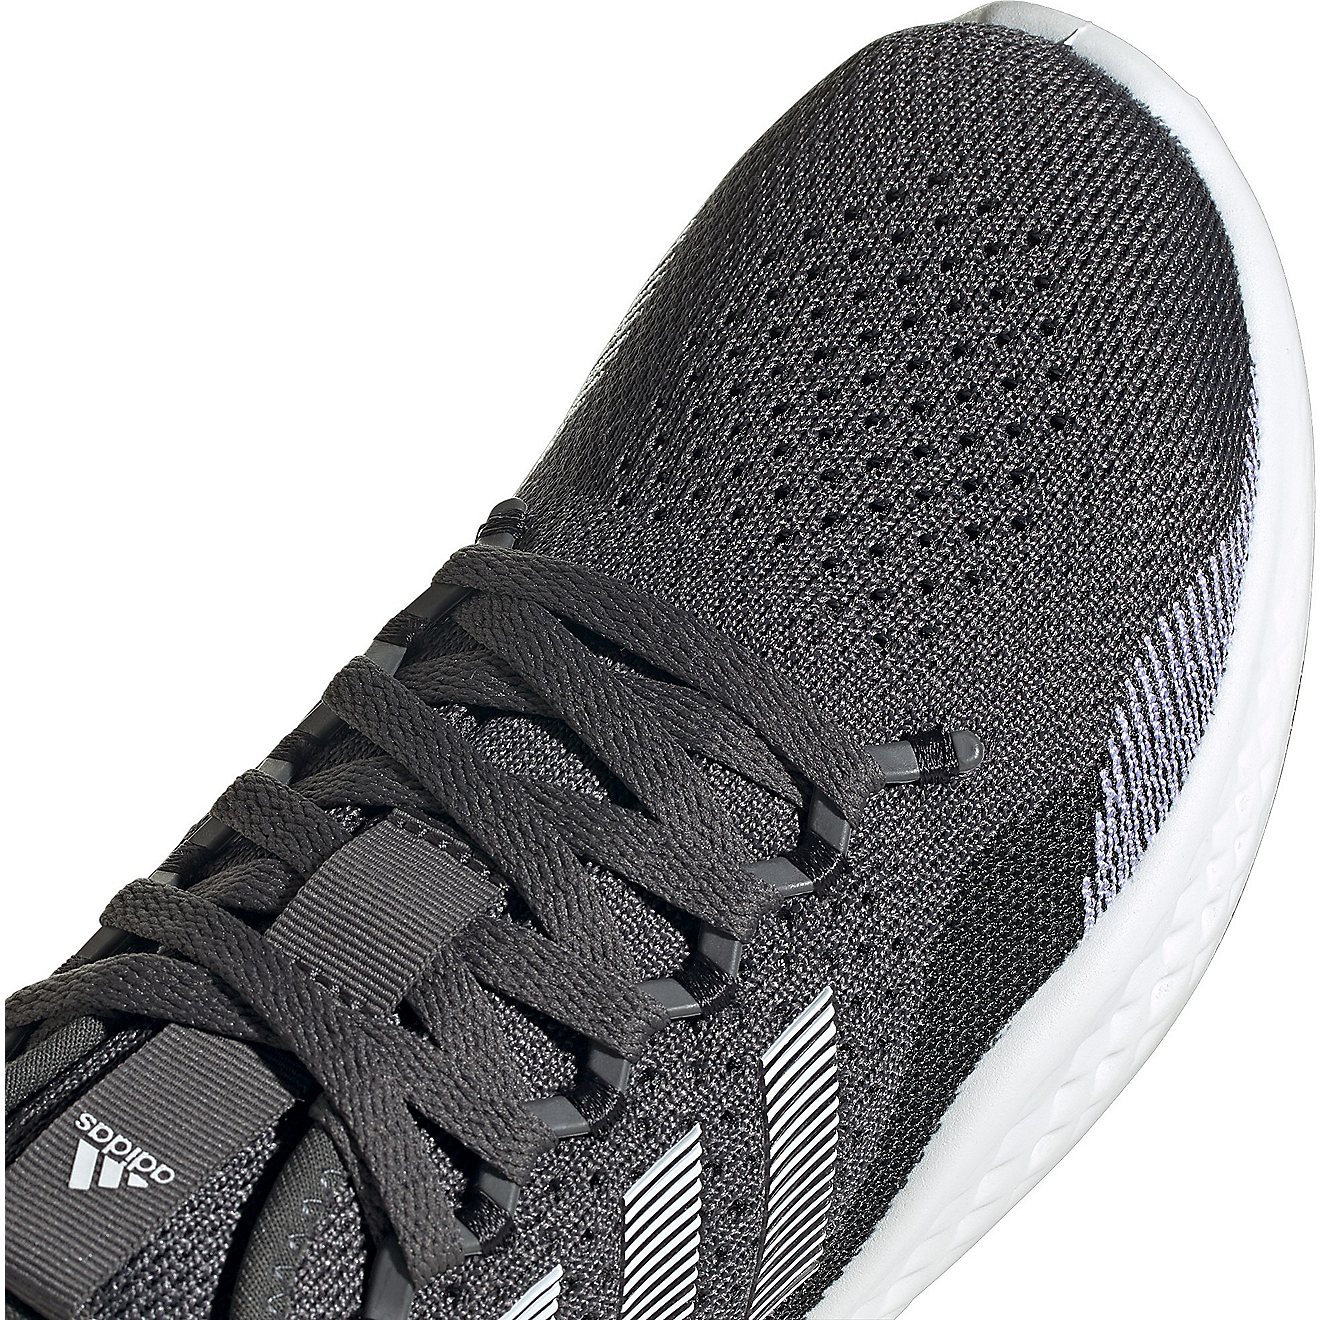 adidas Men's FluidFlow 2.0 Running Shoes                                                                                         - view number 3